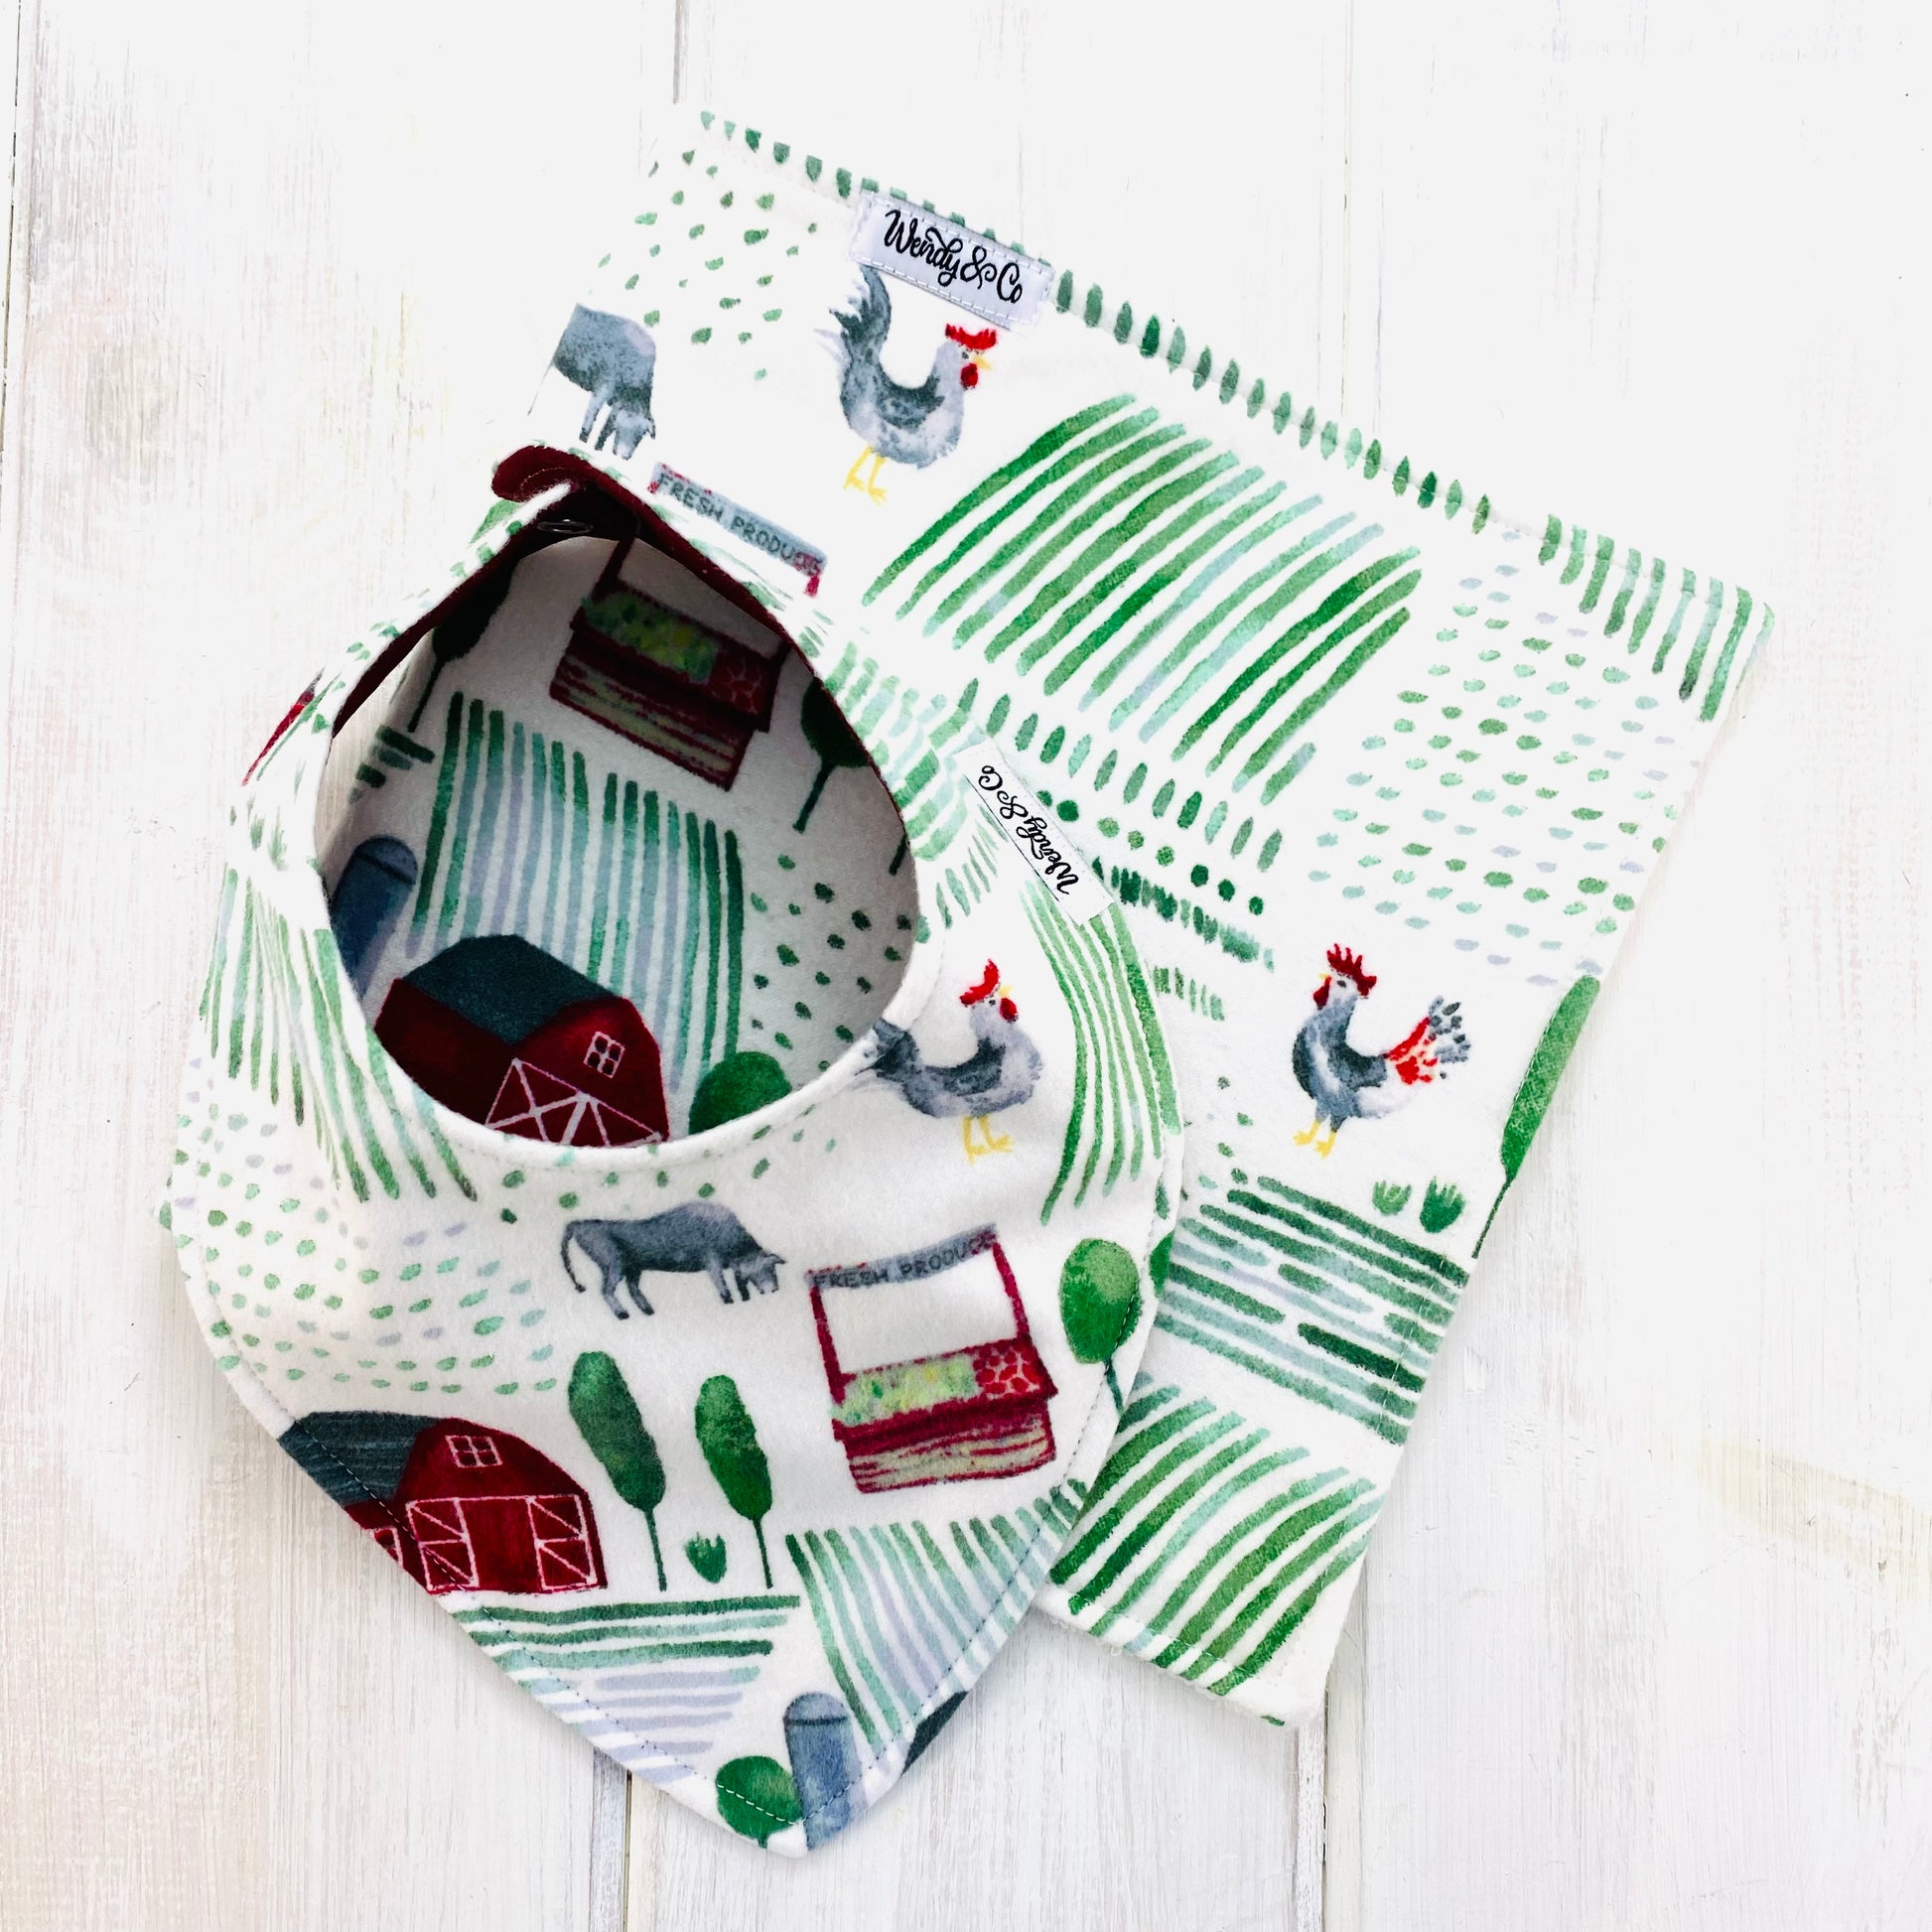 Sustainable burp cloth in super soft farm print with matching bib.